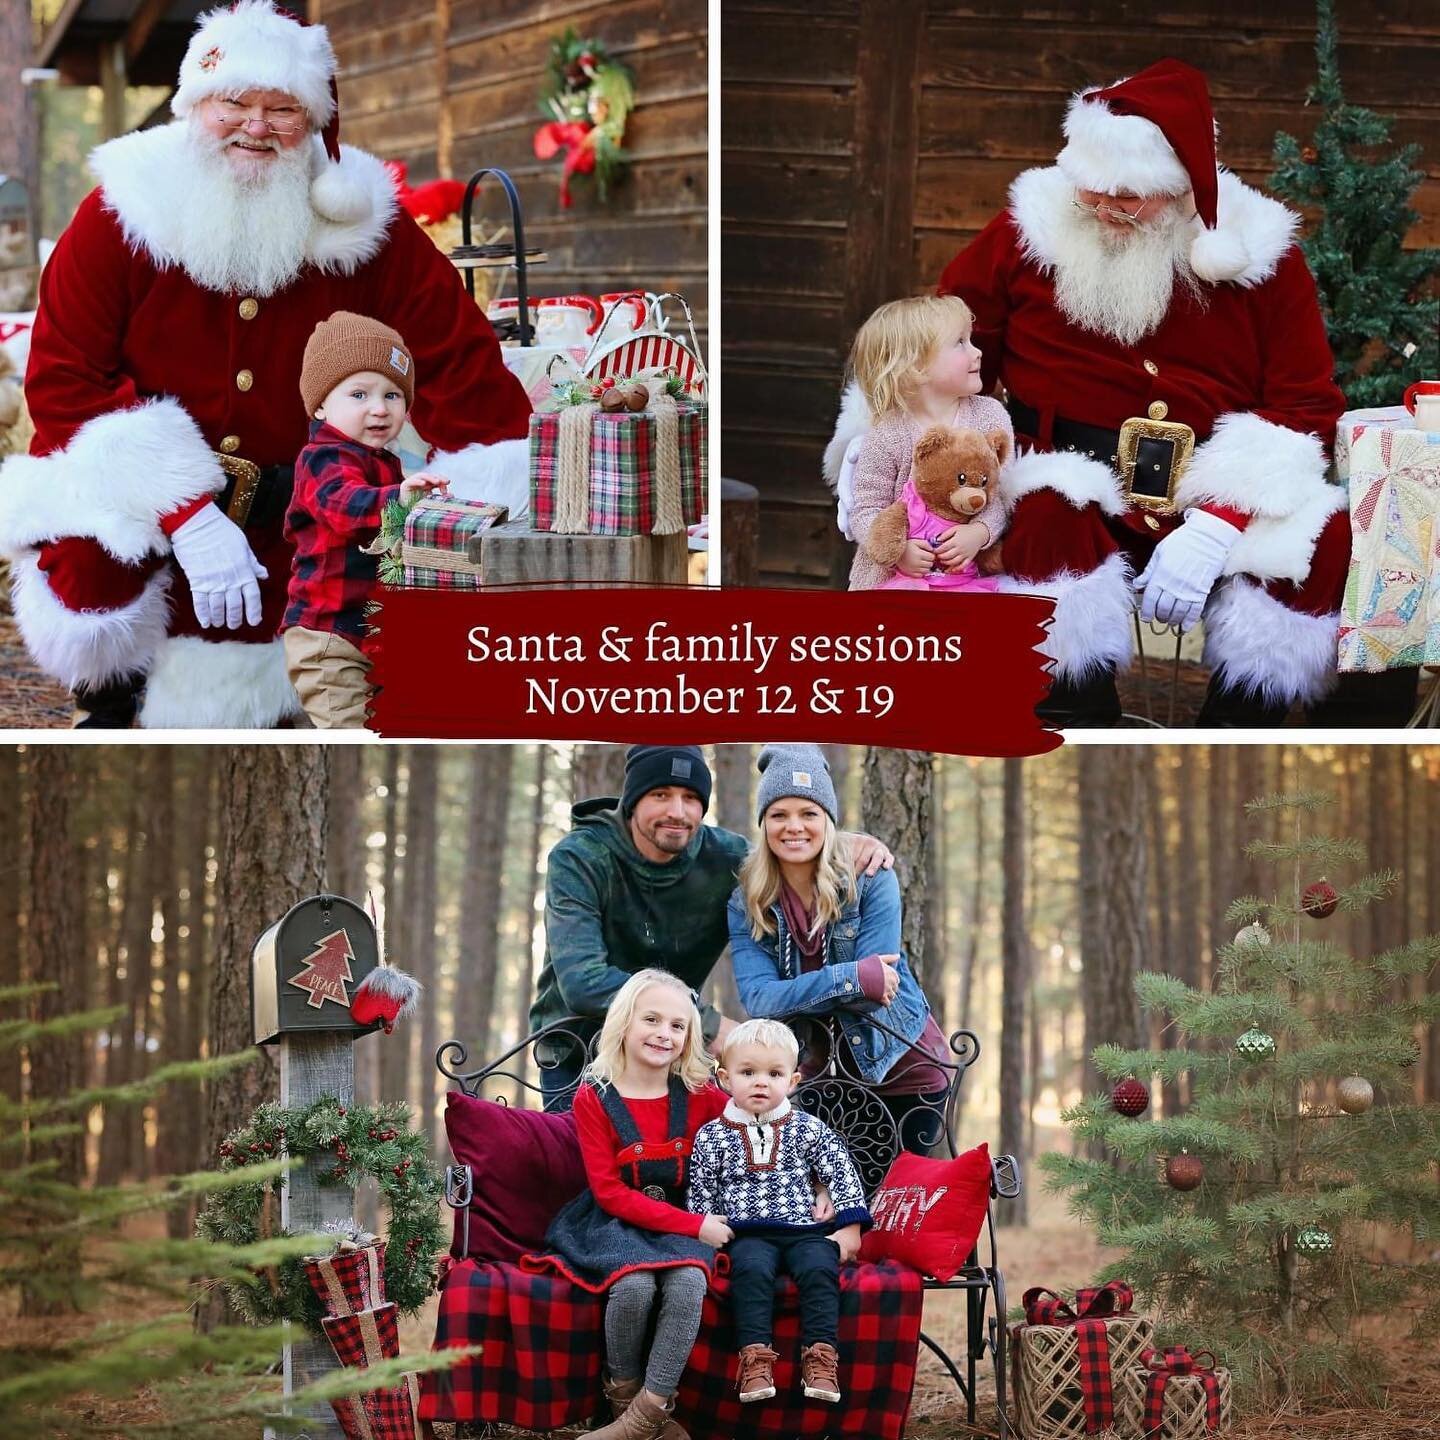 Our Santa and Family Mini Shoots are BACK! And they are some of our most magical sessions of the year, these fill up extra fast so we recommend grabbing a spot right away!

This Holiday mini will take place outdoors on private property - each family 